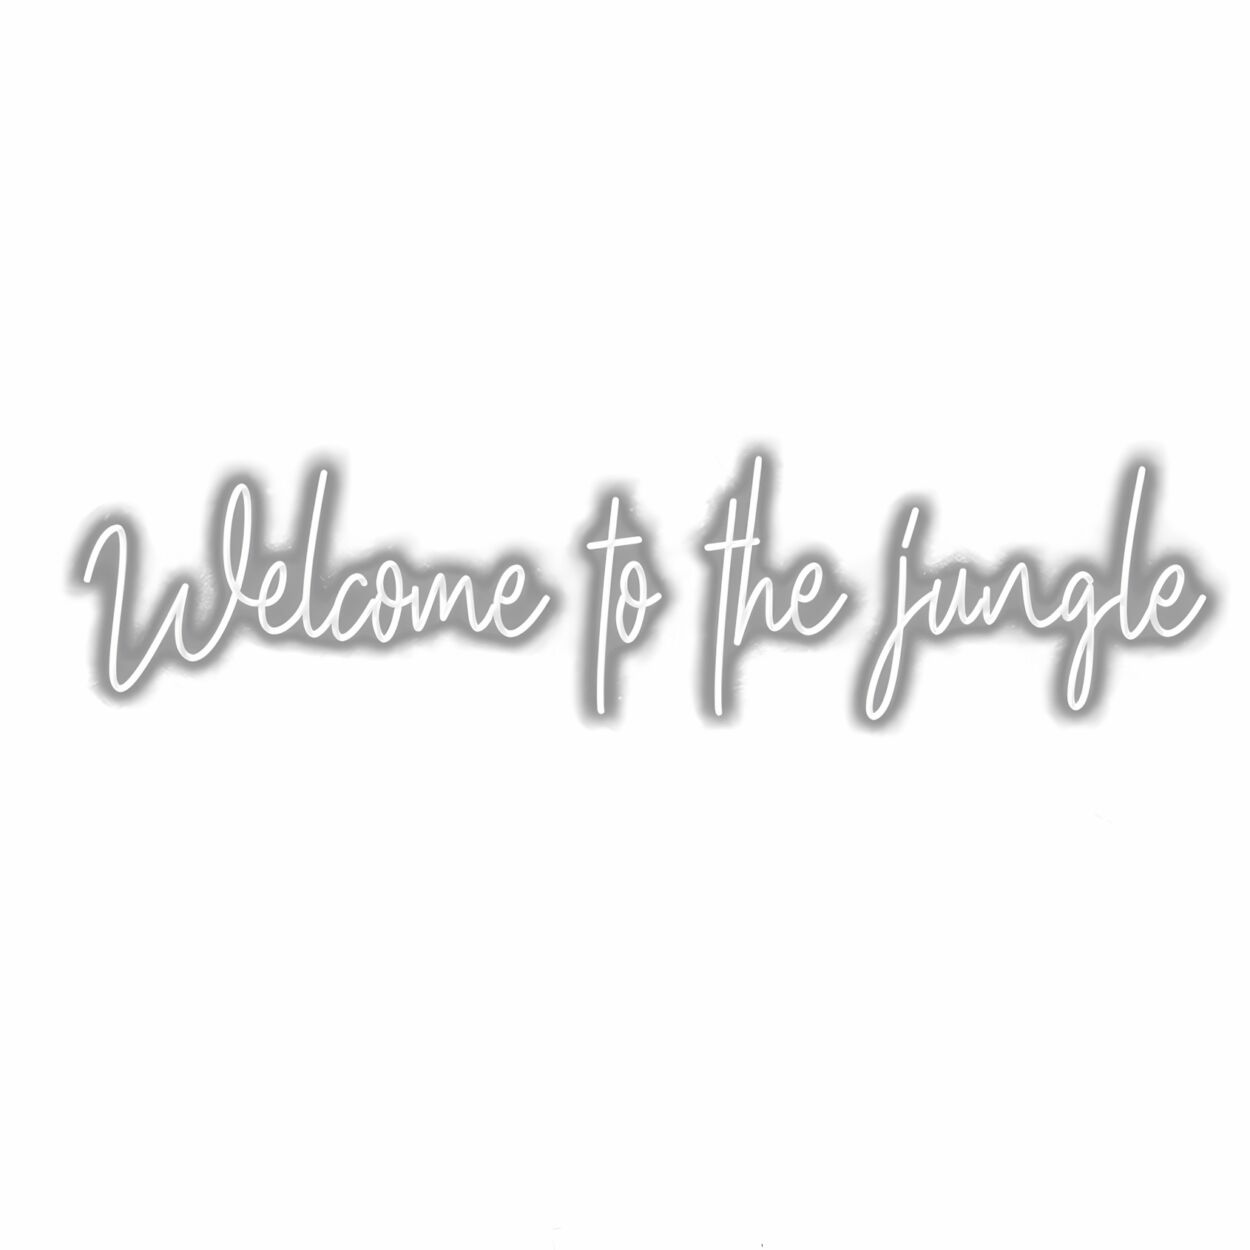 Cursive text "Welcome to the jungle" shadow effect.